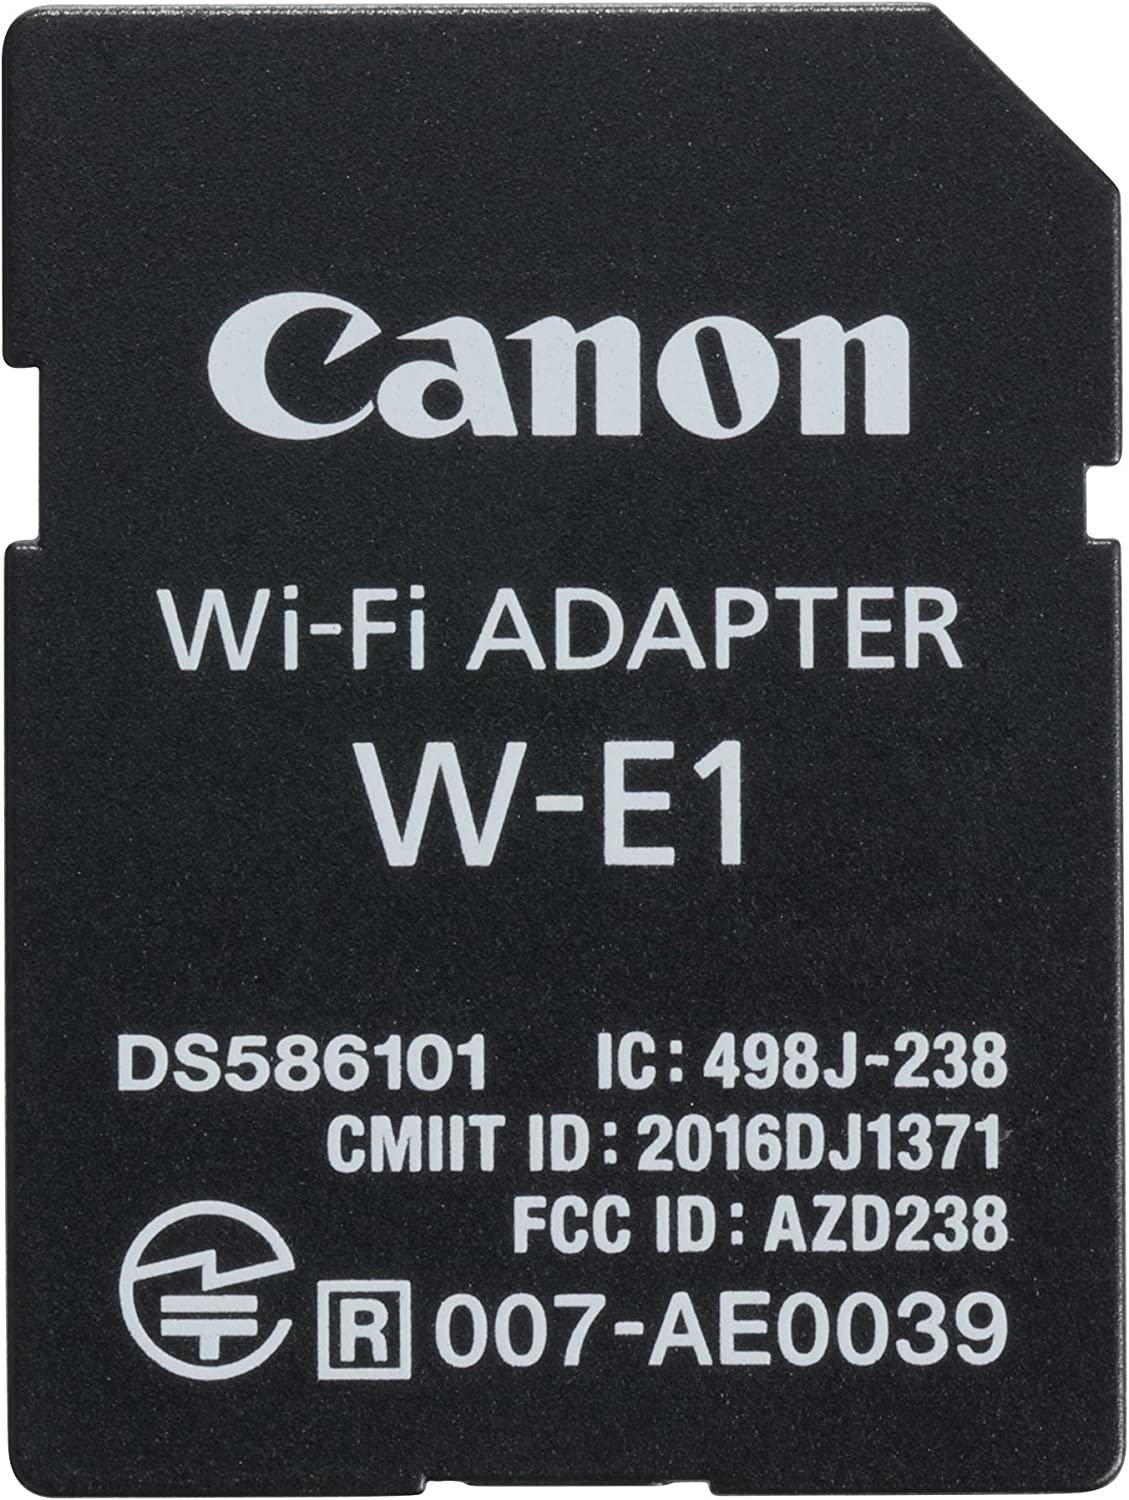 Canon Wi-Fi Mobile Adapter W-E1 for EOS 7D Mark II, EOS 5DS, EOS 5DS R Cameras